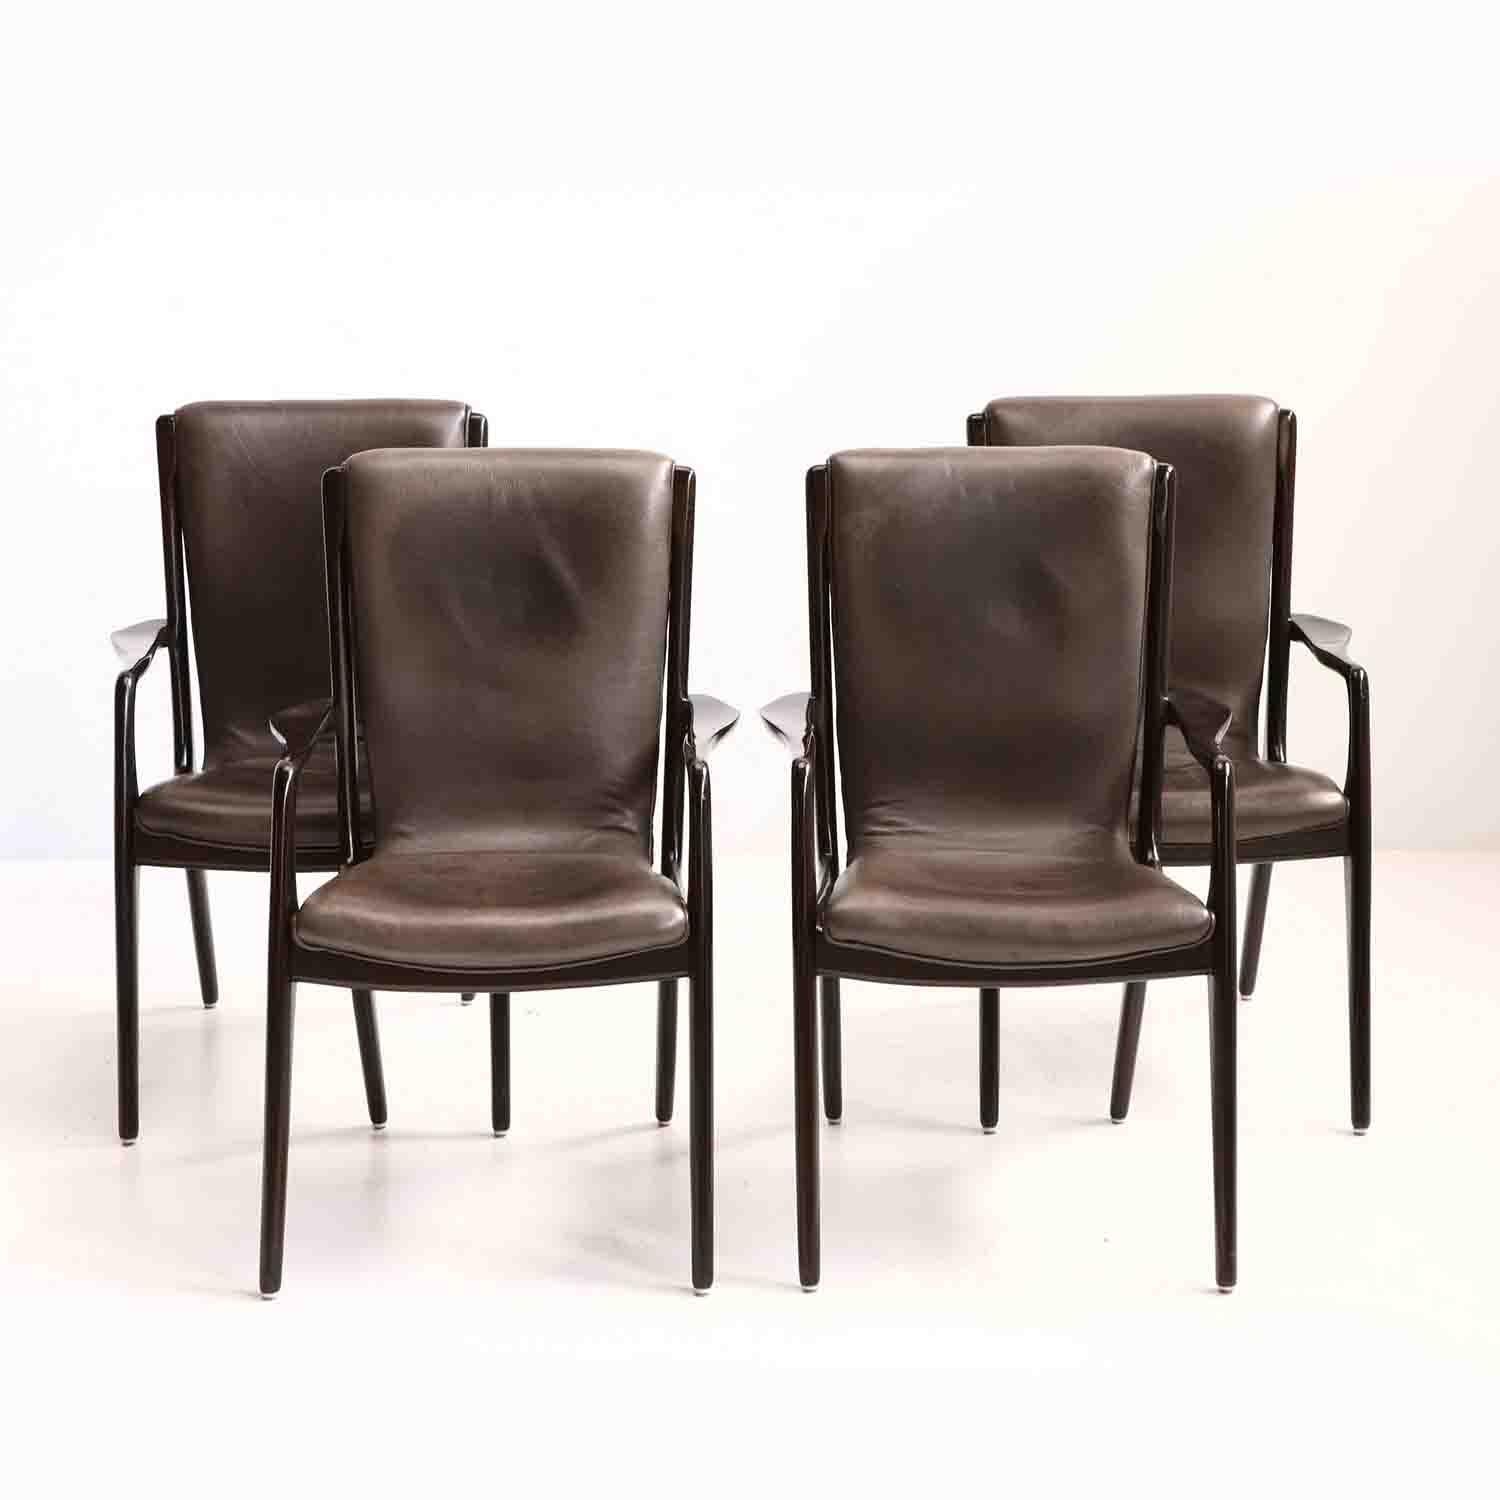 Set of 4 Midcentury Vladimir Kagan Sculpted Sling Dining Chairs Model VK 101A For Sale 5